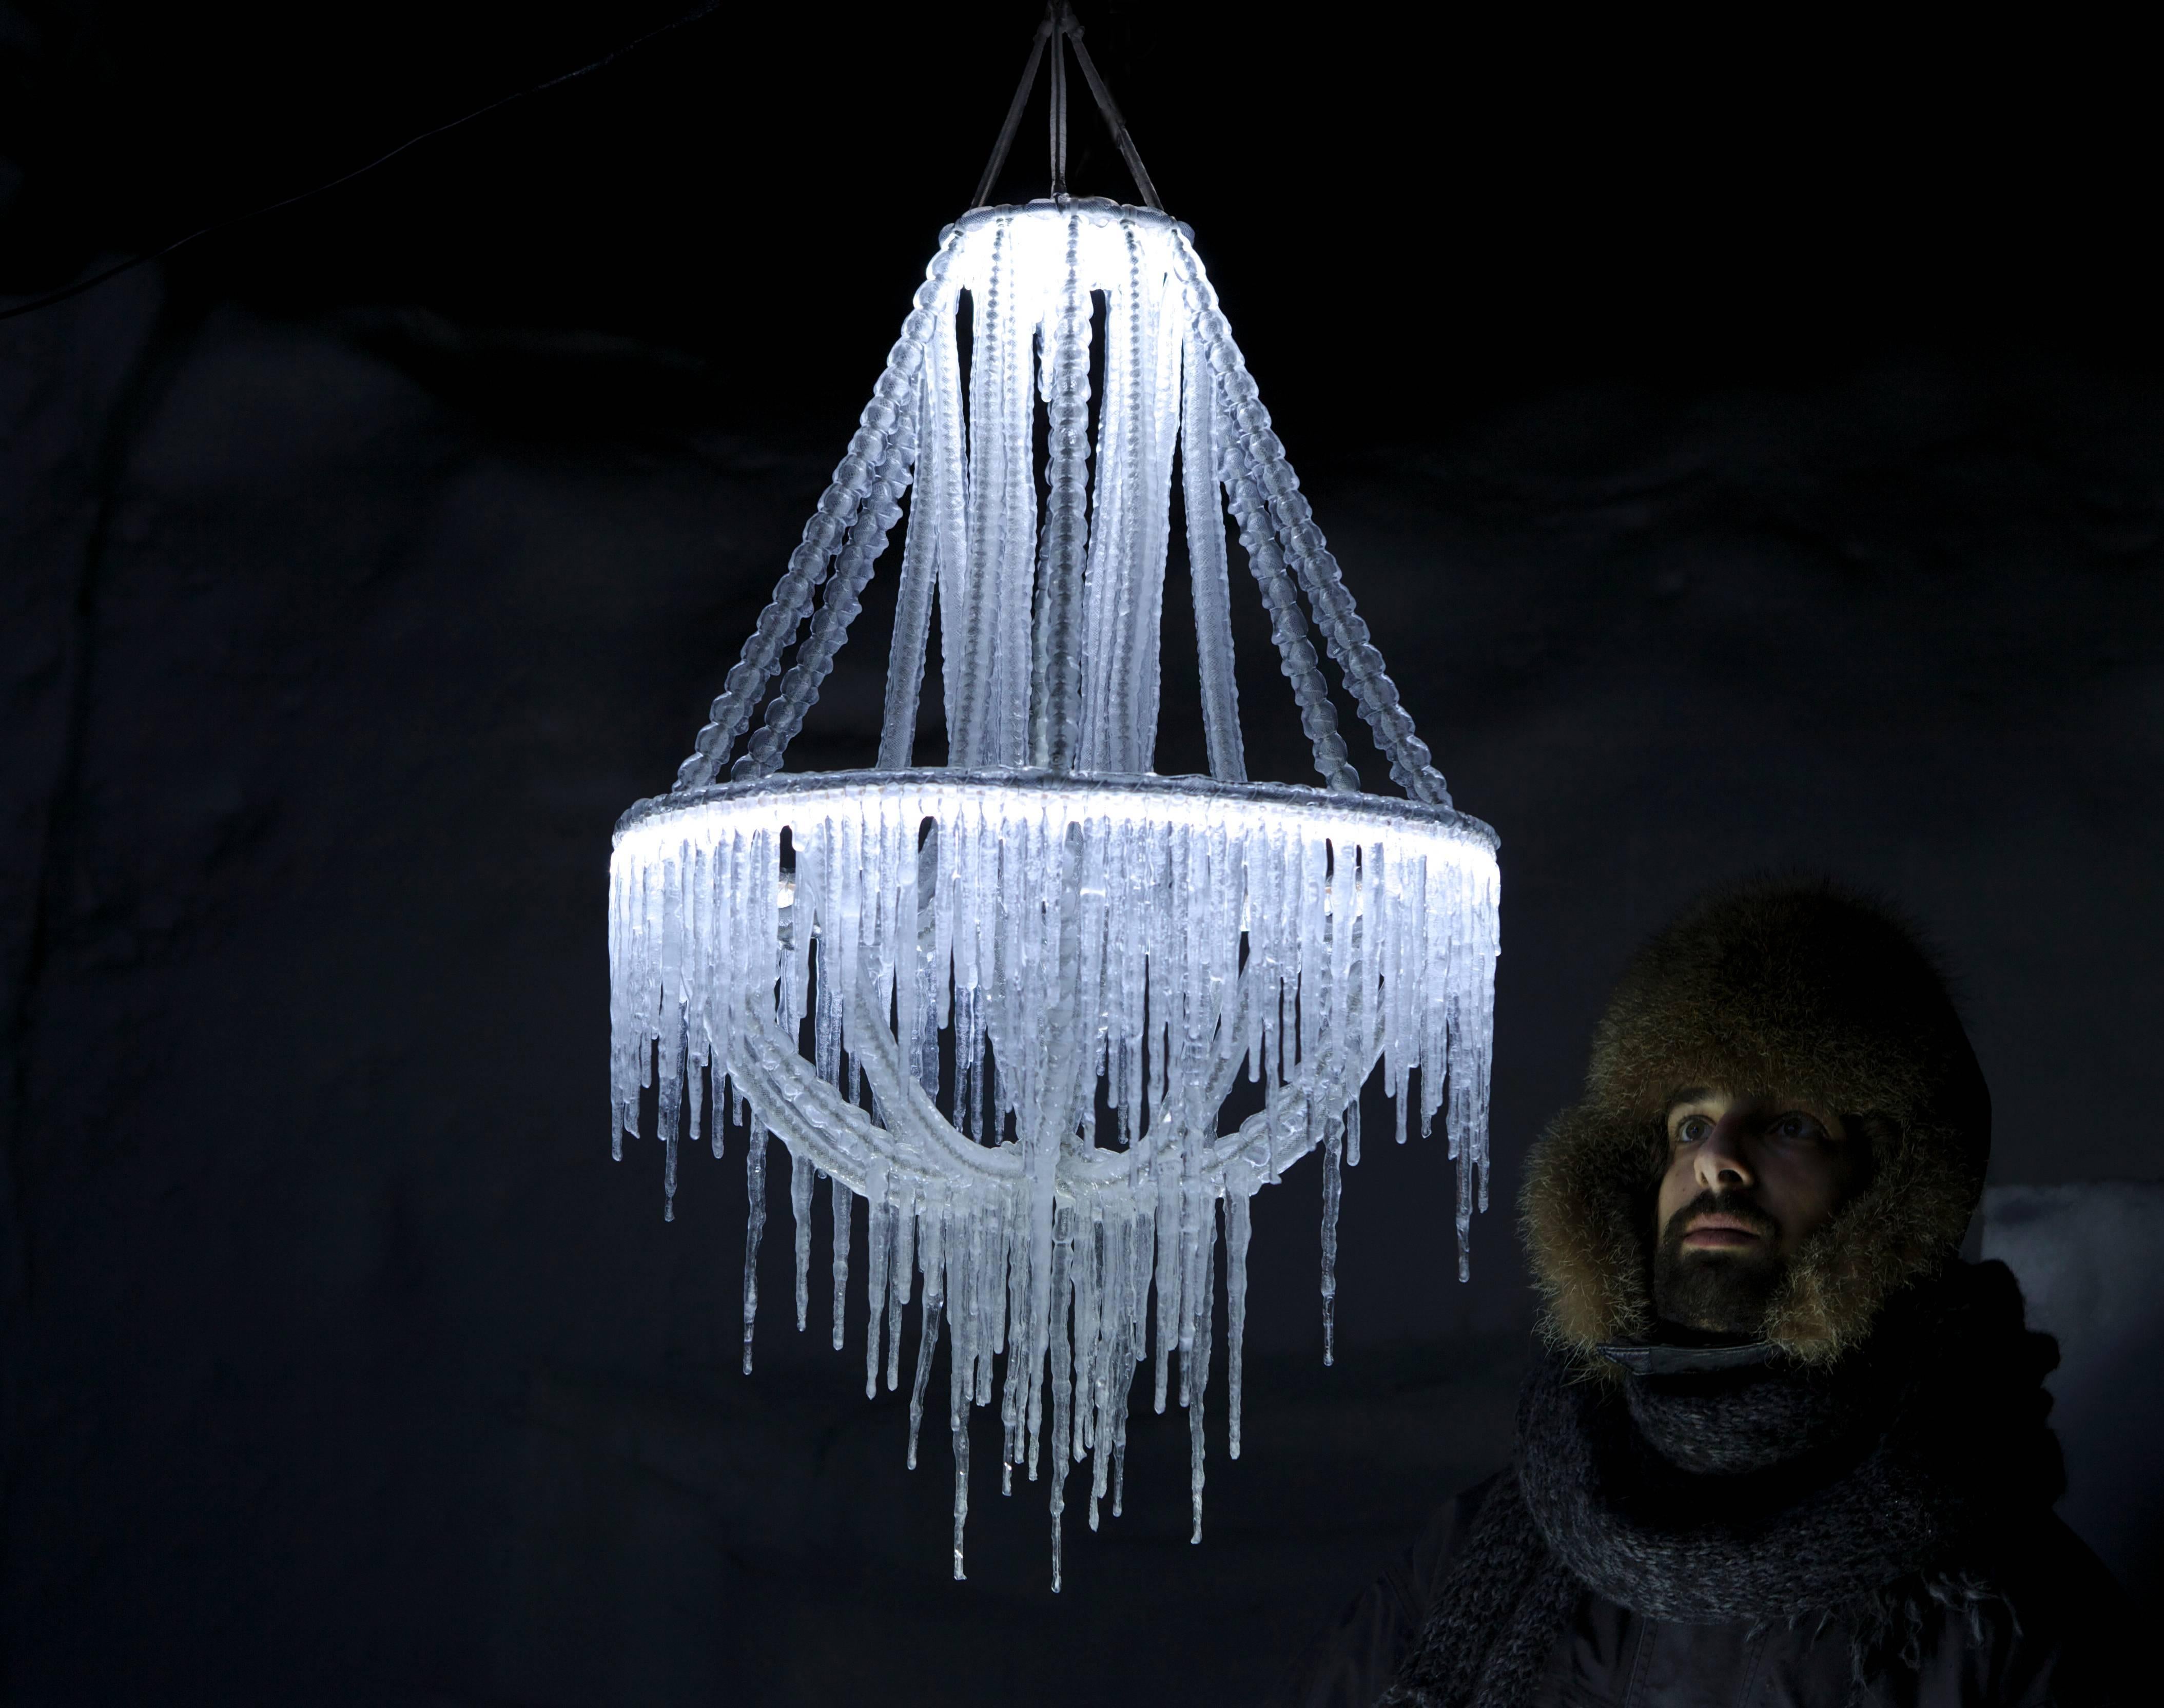 Polar Light by Arturo Erbsman (Land Art Design, Made in Lapland )
Dimensions: 50 x 50 x 100 cm
Materials: Metal wire, chain, mesh, water 

Arturo Erbsman comes himself to install the Polar light. It has to be in an -7°C in order to maintain. An ice